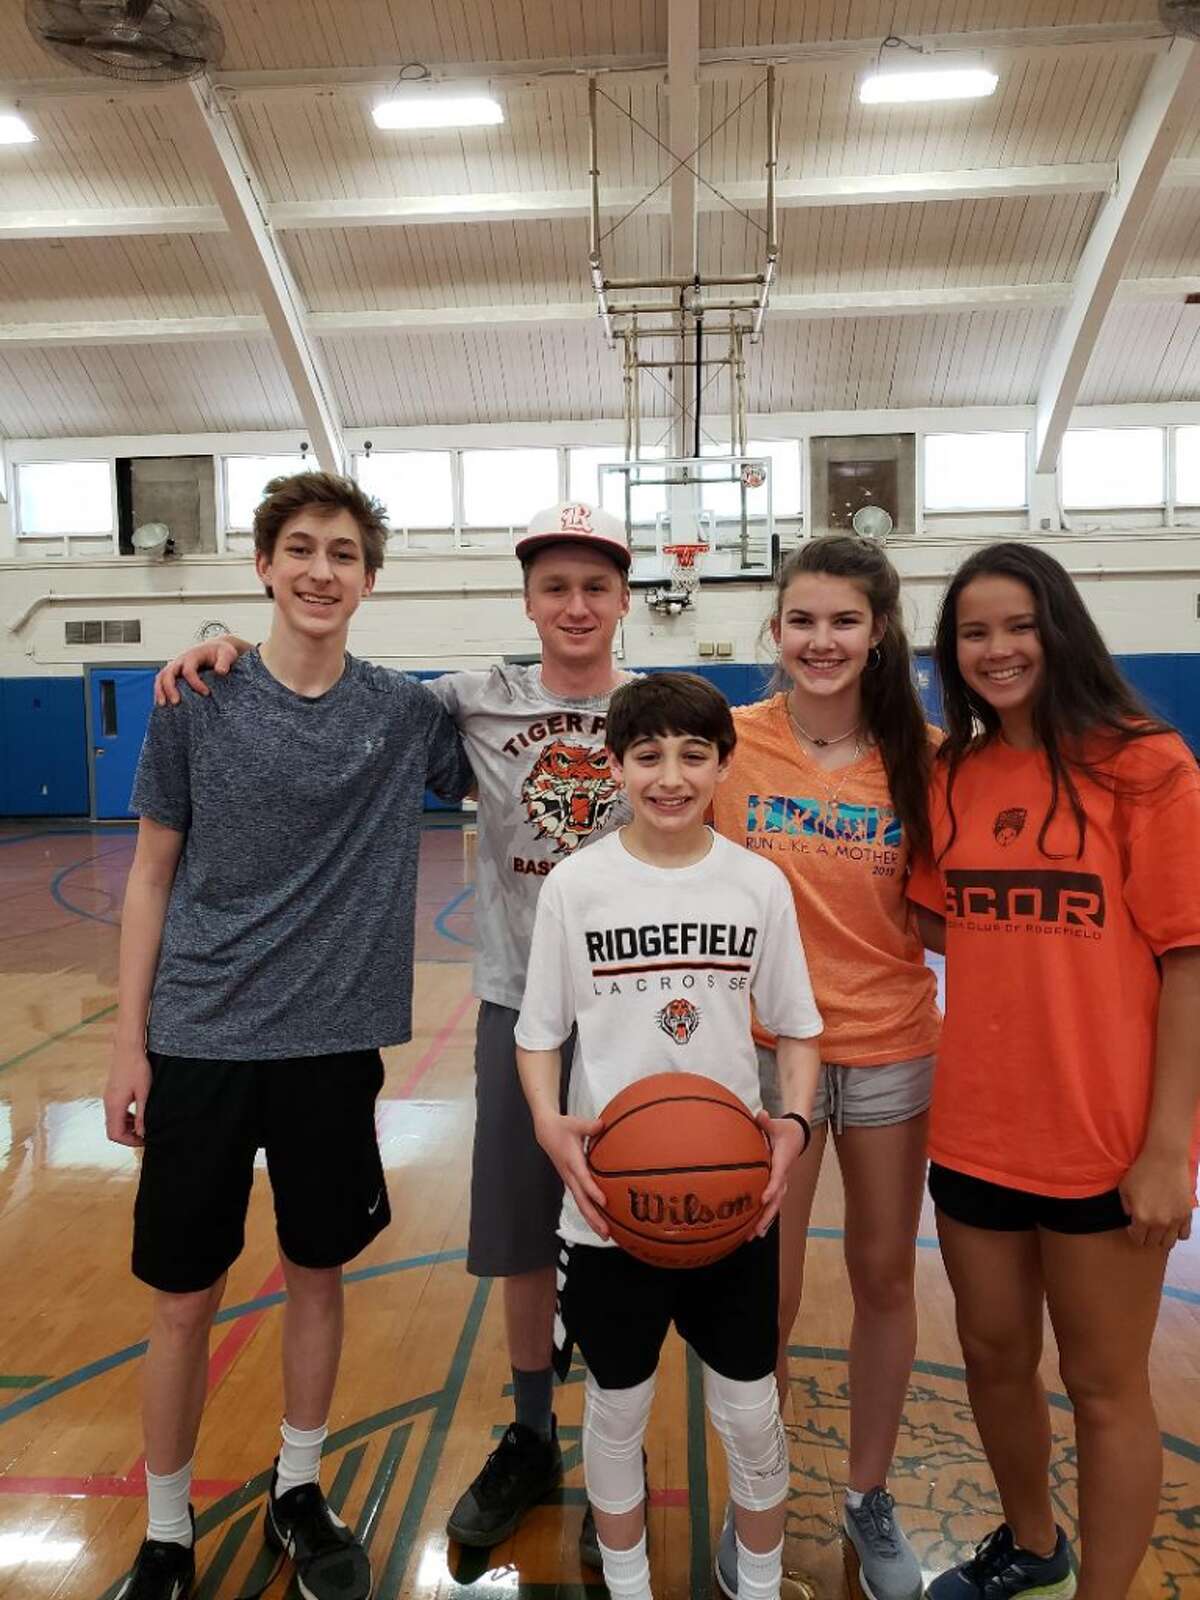 Ridgefield Full Court Peace members (left to right) Shane Gagliardi, Jason Hartnett, Katie Flynn, and Rachel Tomasetti with participant Ethan Serby who requested donations in lieu of Bar Mitzvah presents. Not shown: Full Court Peace members Evan Collins, Finn Atkins, Sean Maue, Max Crowley, Kate Garson, and Jamie Narcisso.